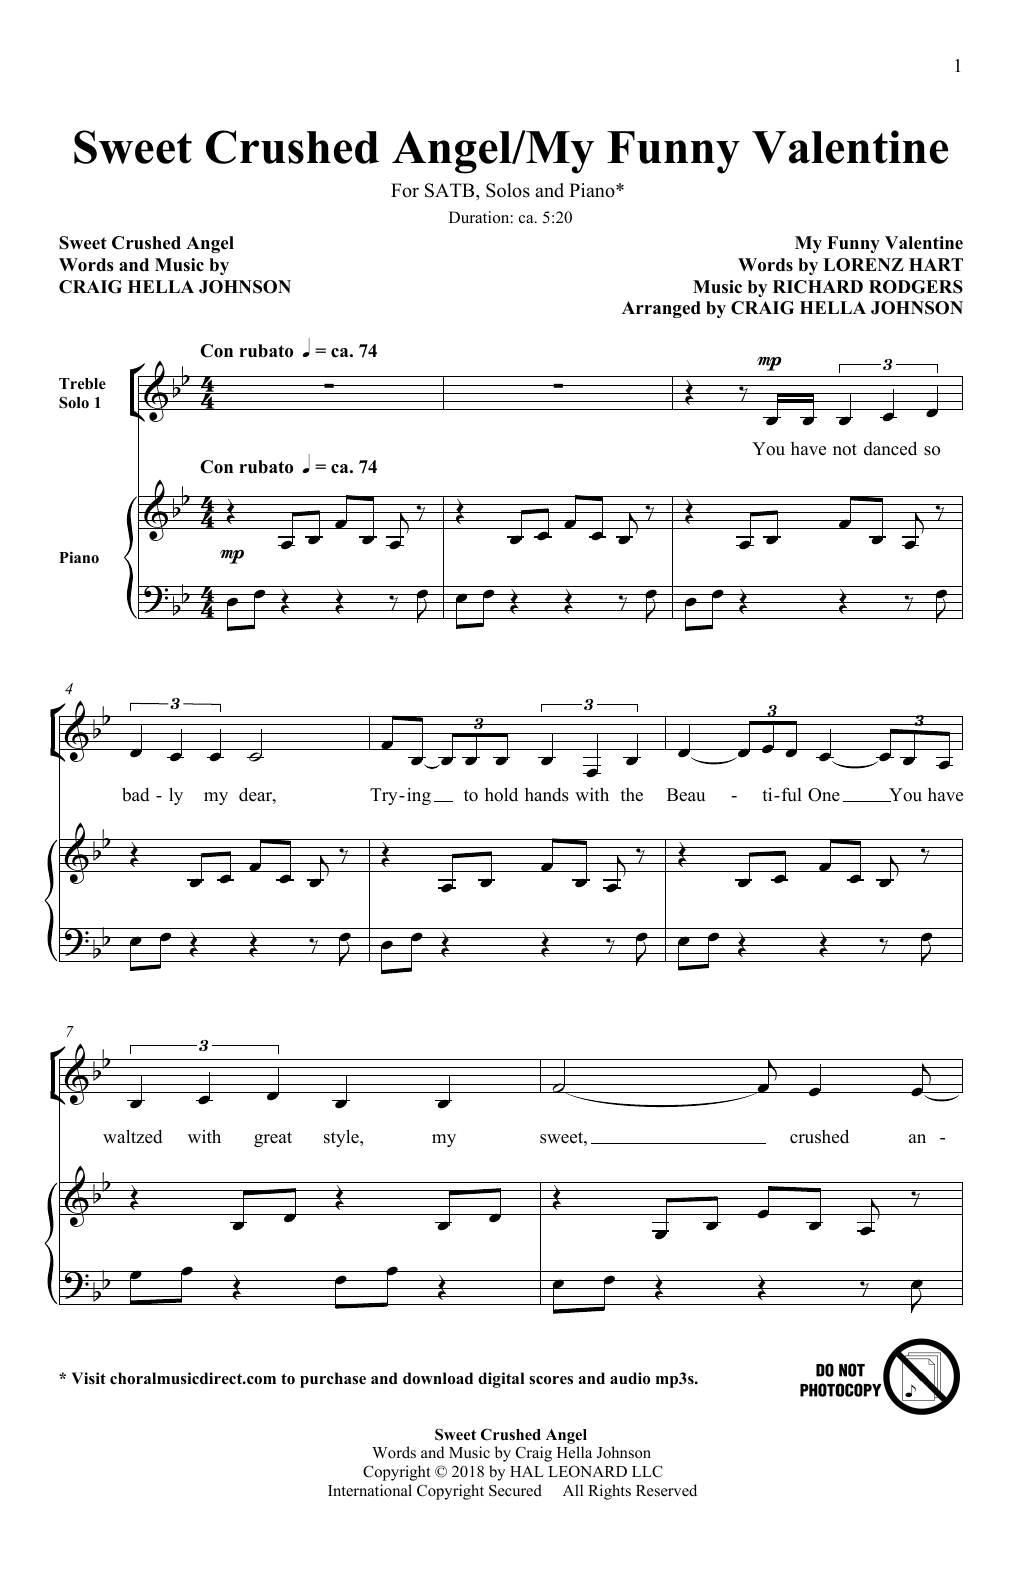 Download Rodgers & Hart Sweet Crushed Angel/My Funny Valentine Sheet Music